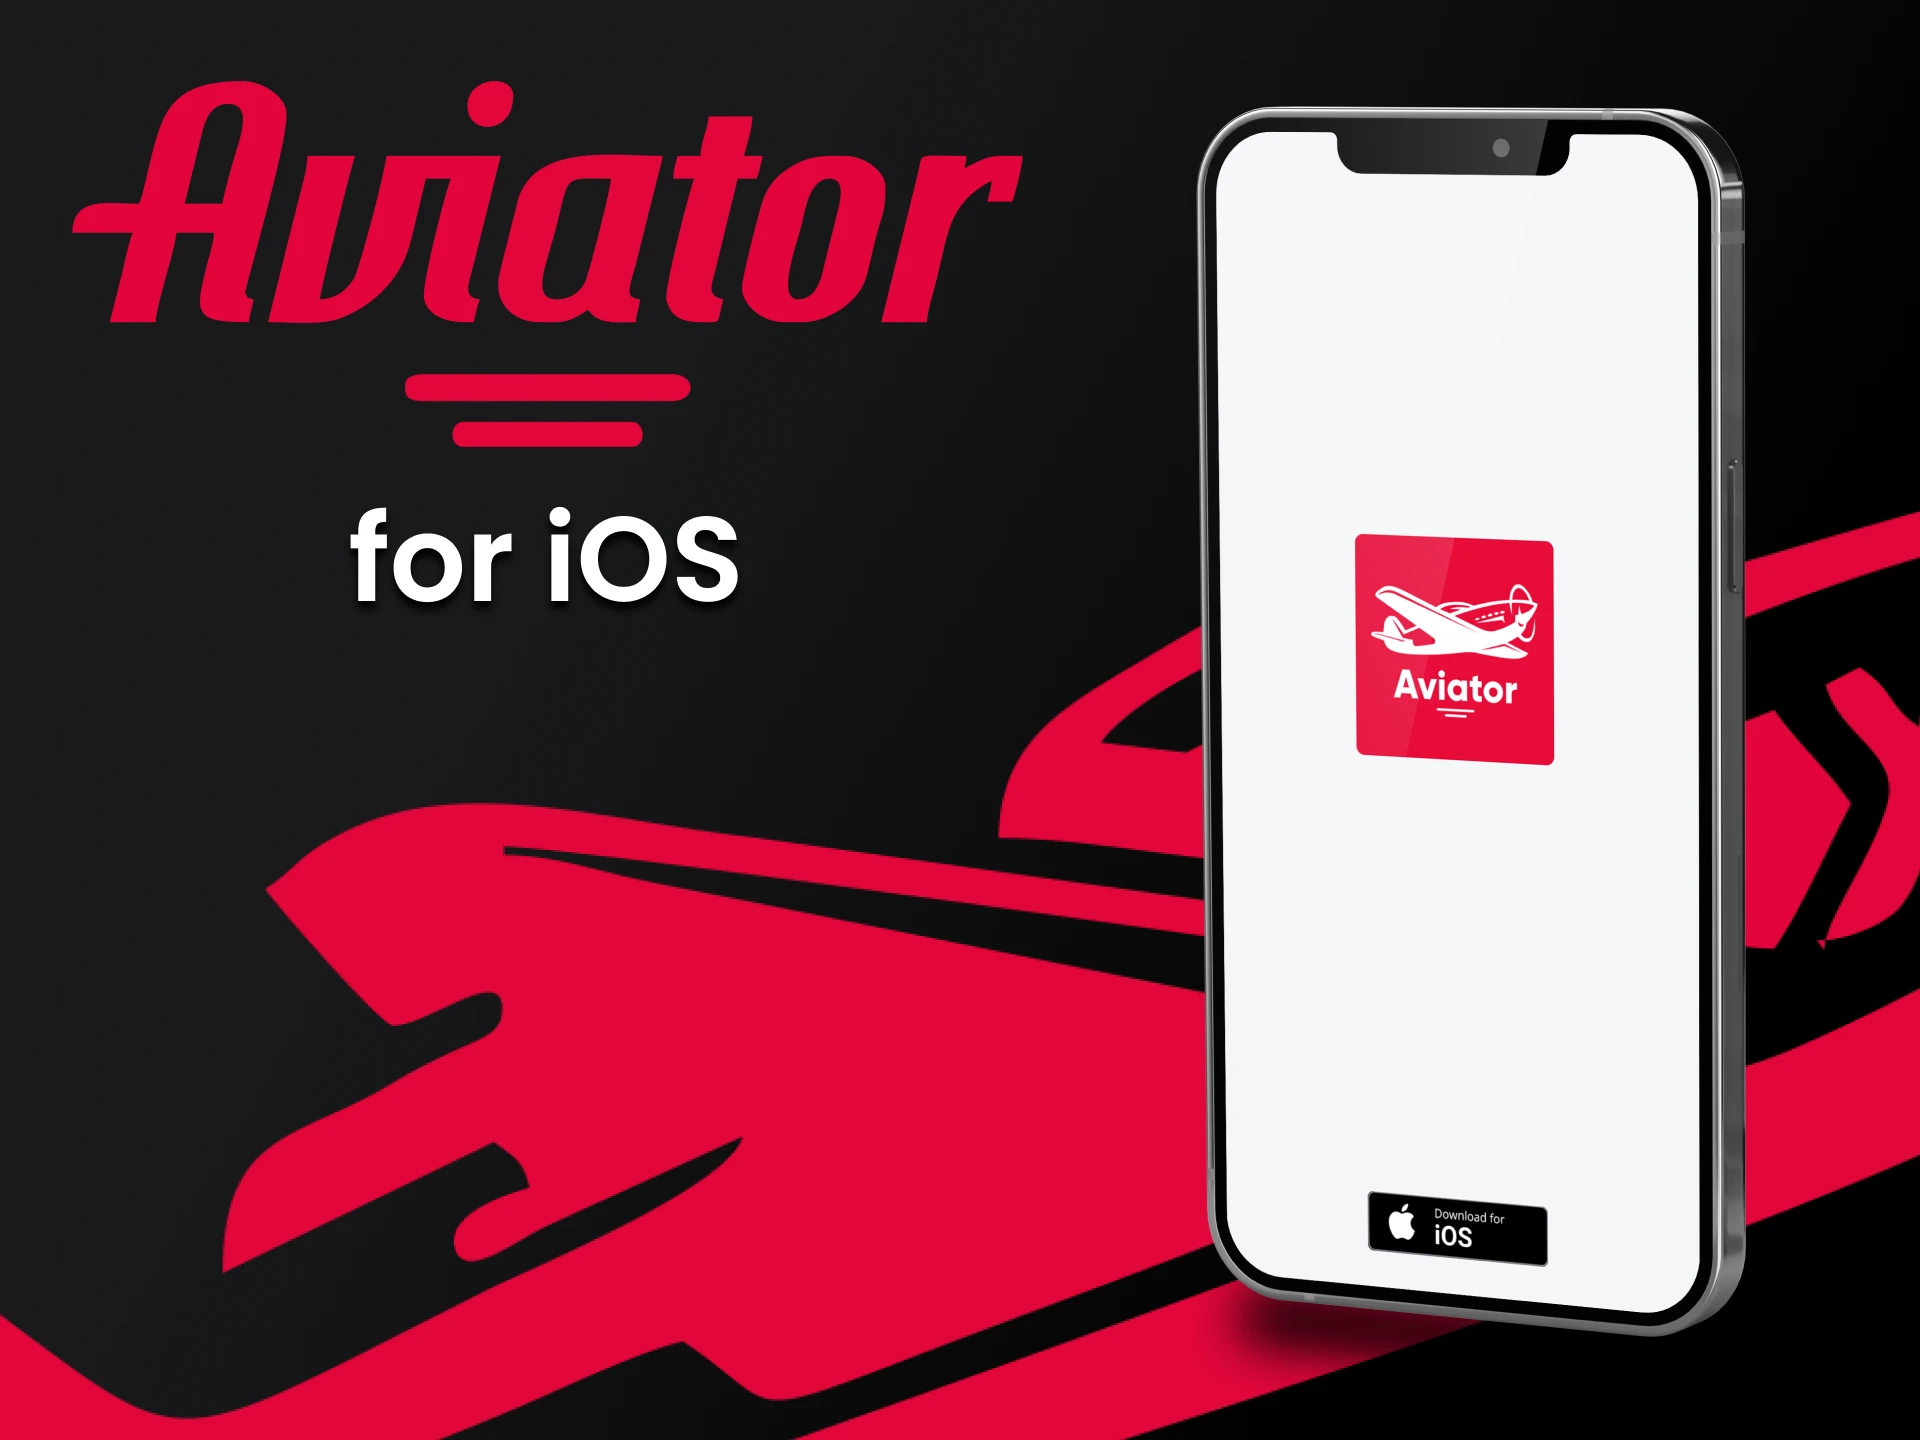 Explore how to download the Aviator app for iOS devices.